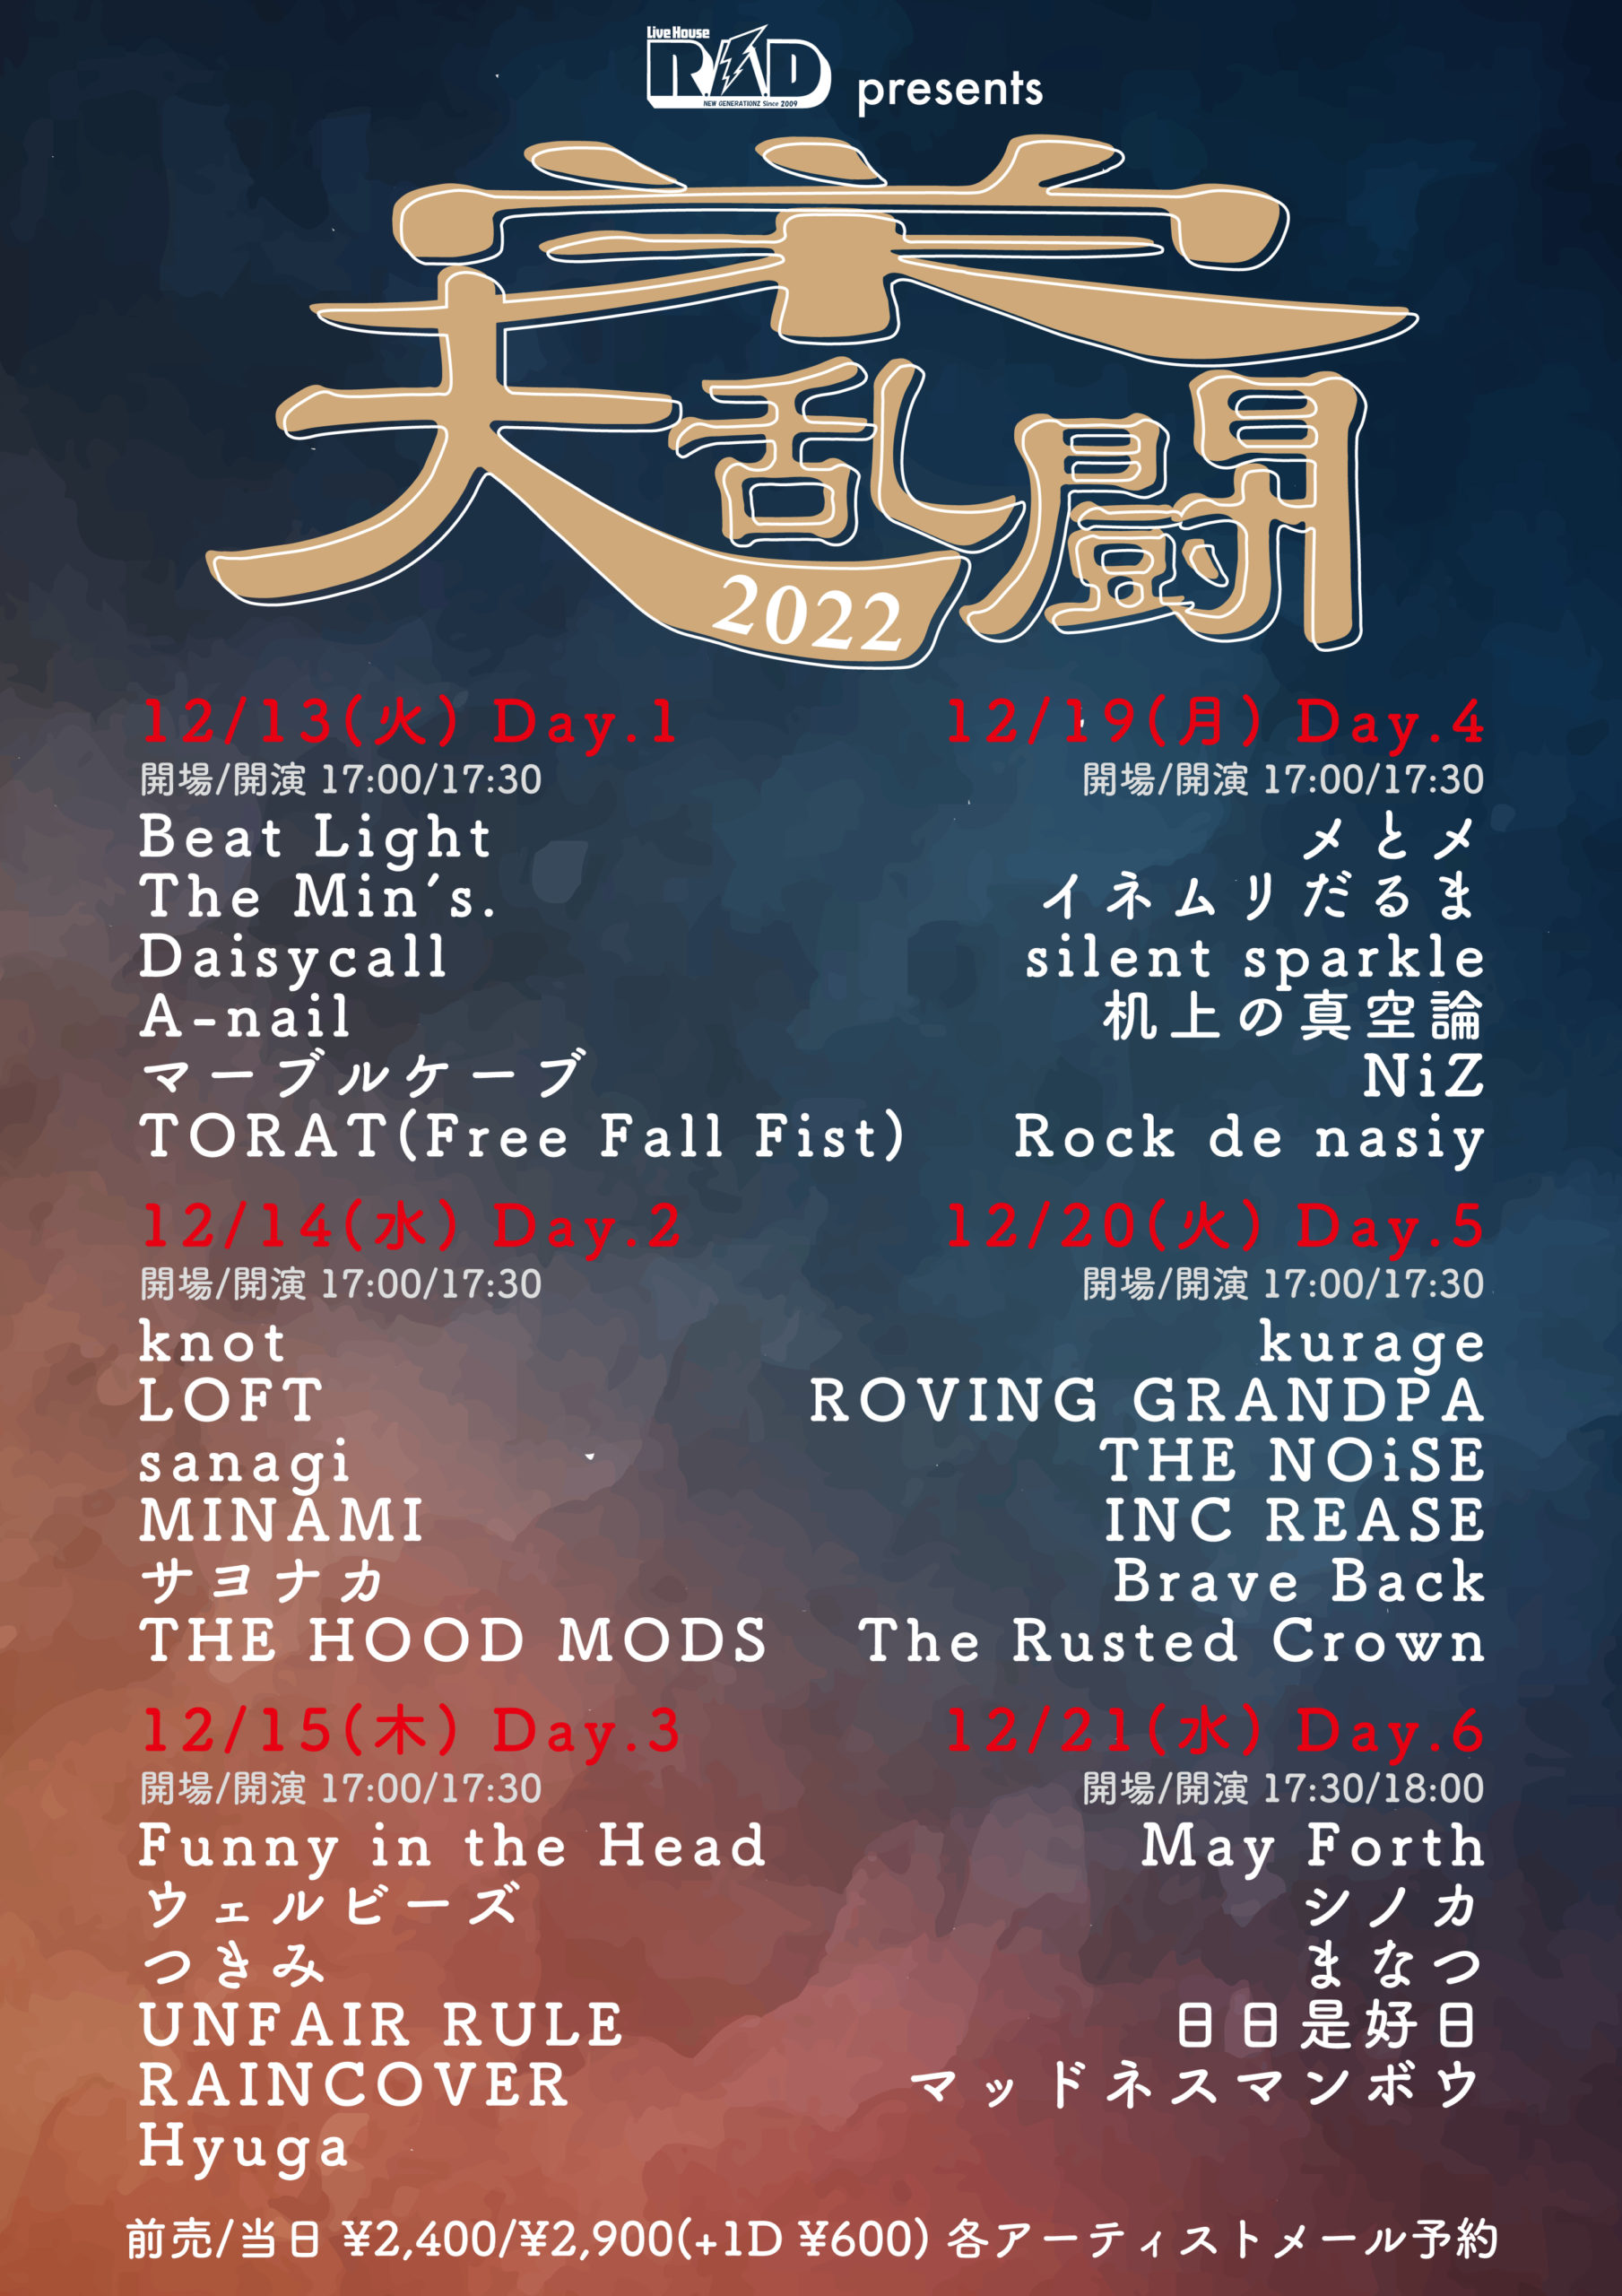 R.A.D presents 栄大乱闘2022 Day.4